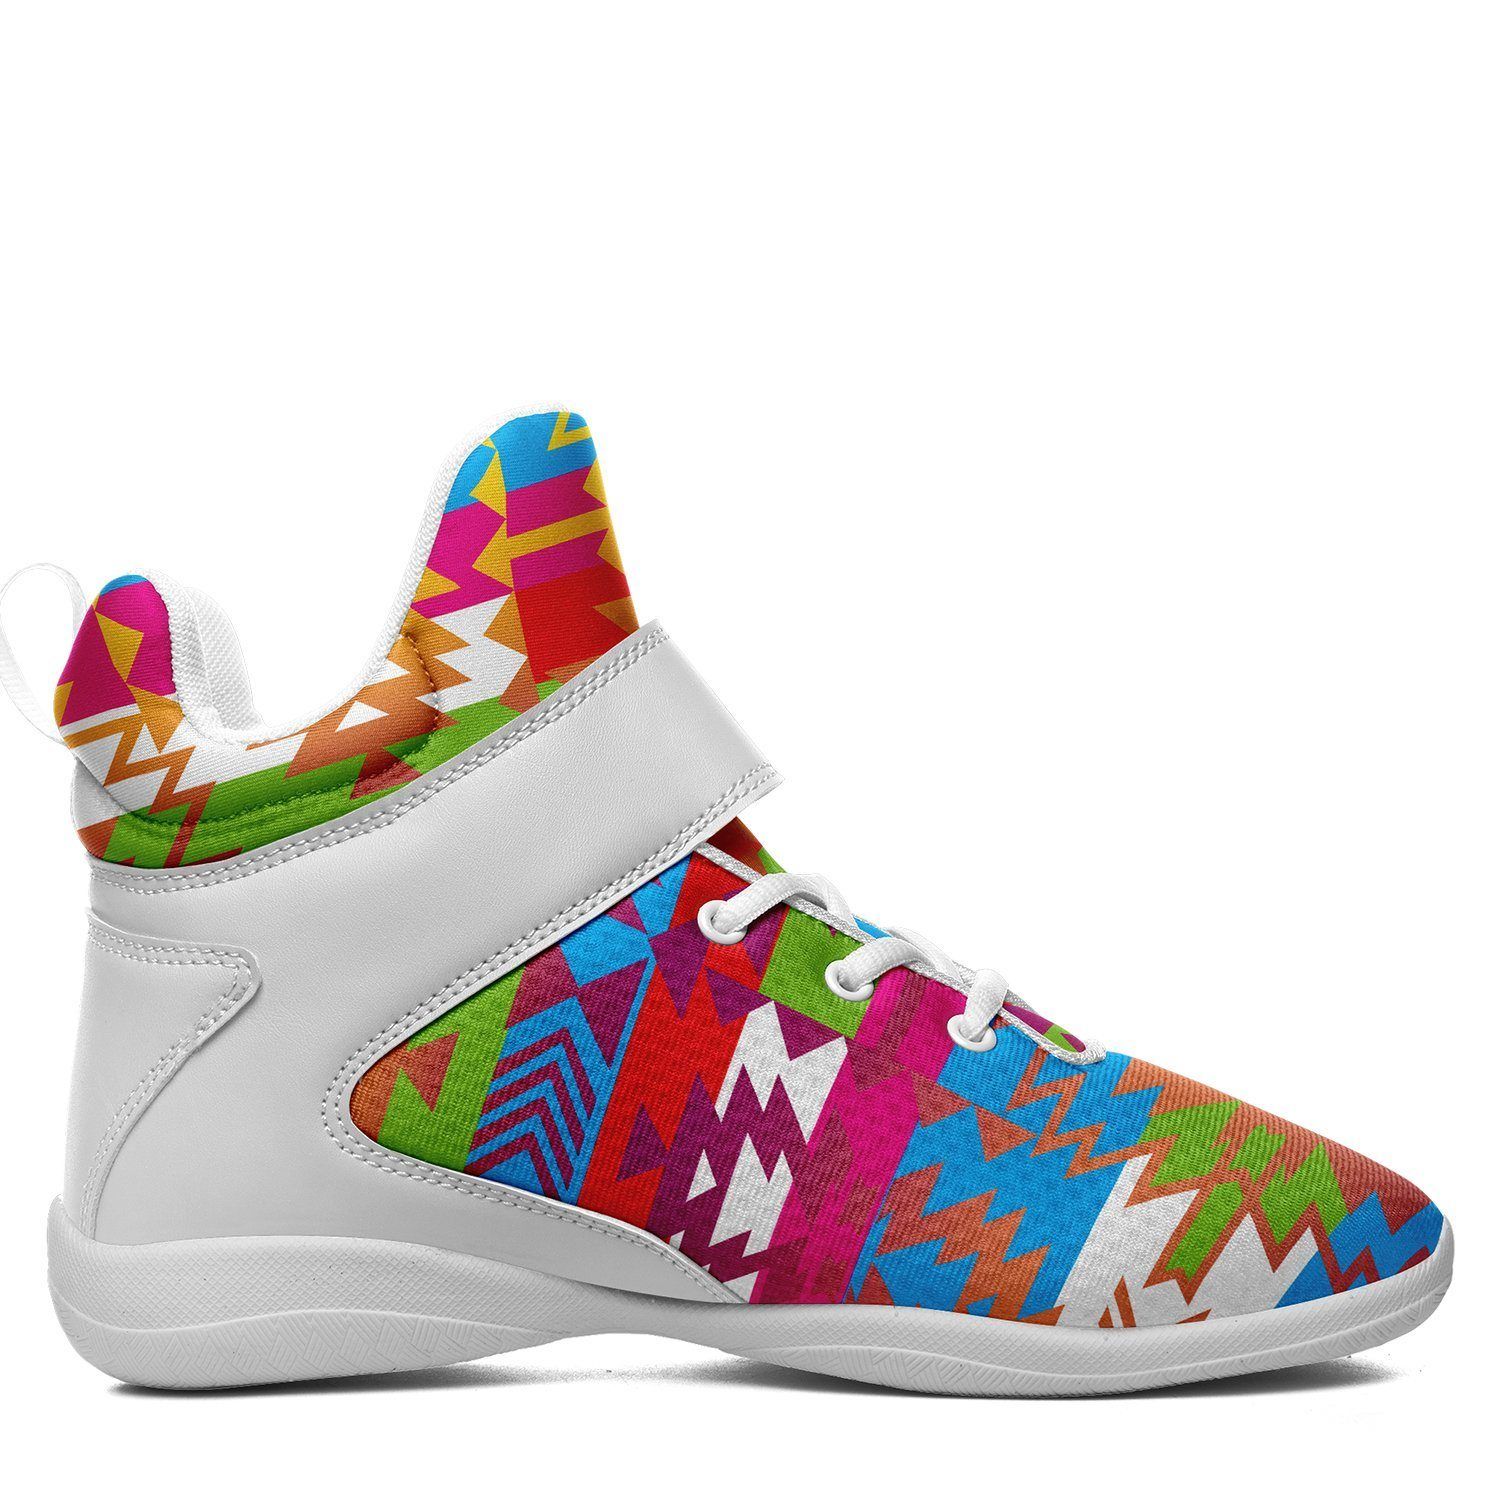 Grand Entry Ipottaa Basketball / Sport High Top Shoes - White Sole 49 Dzine 